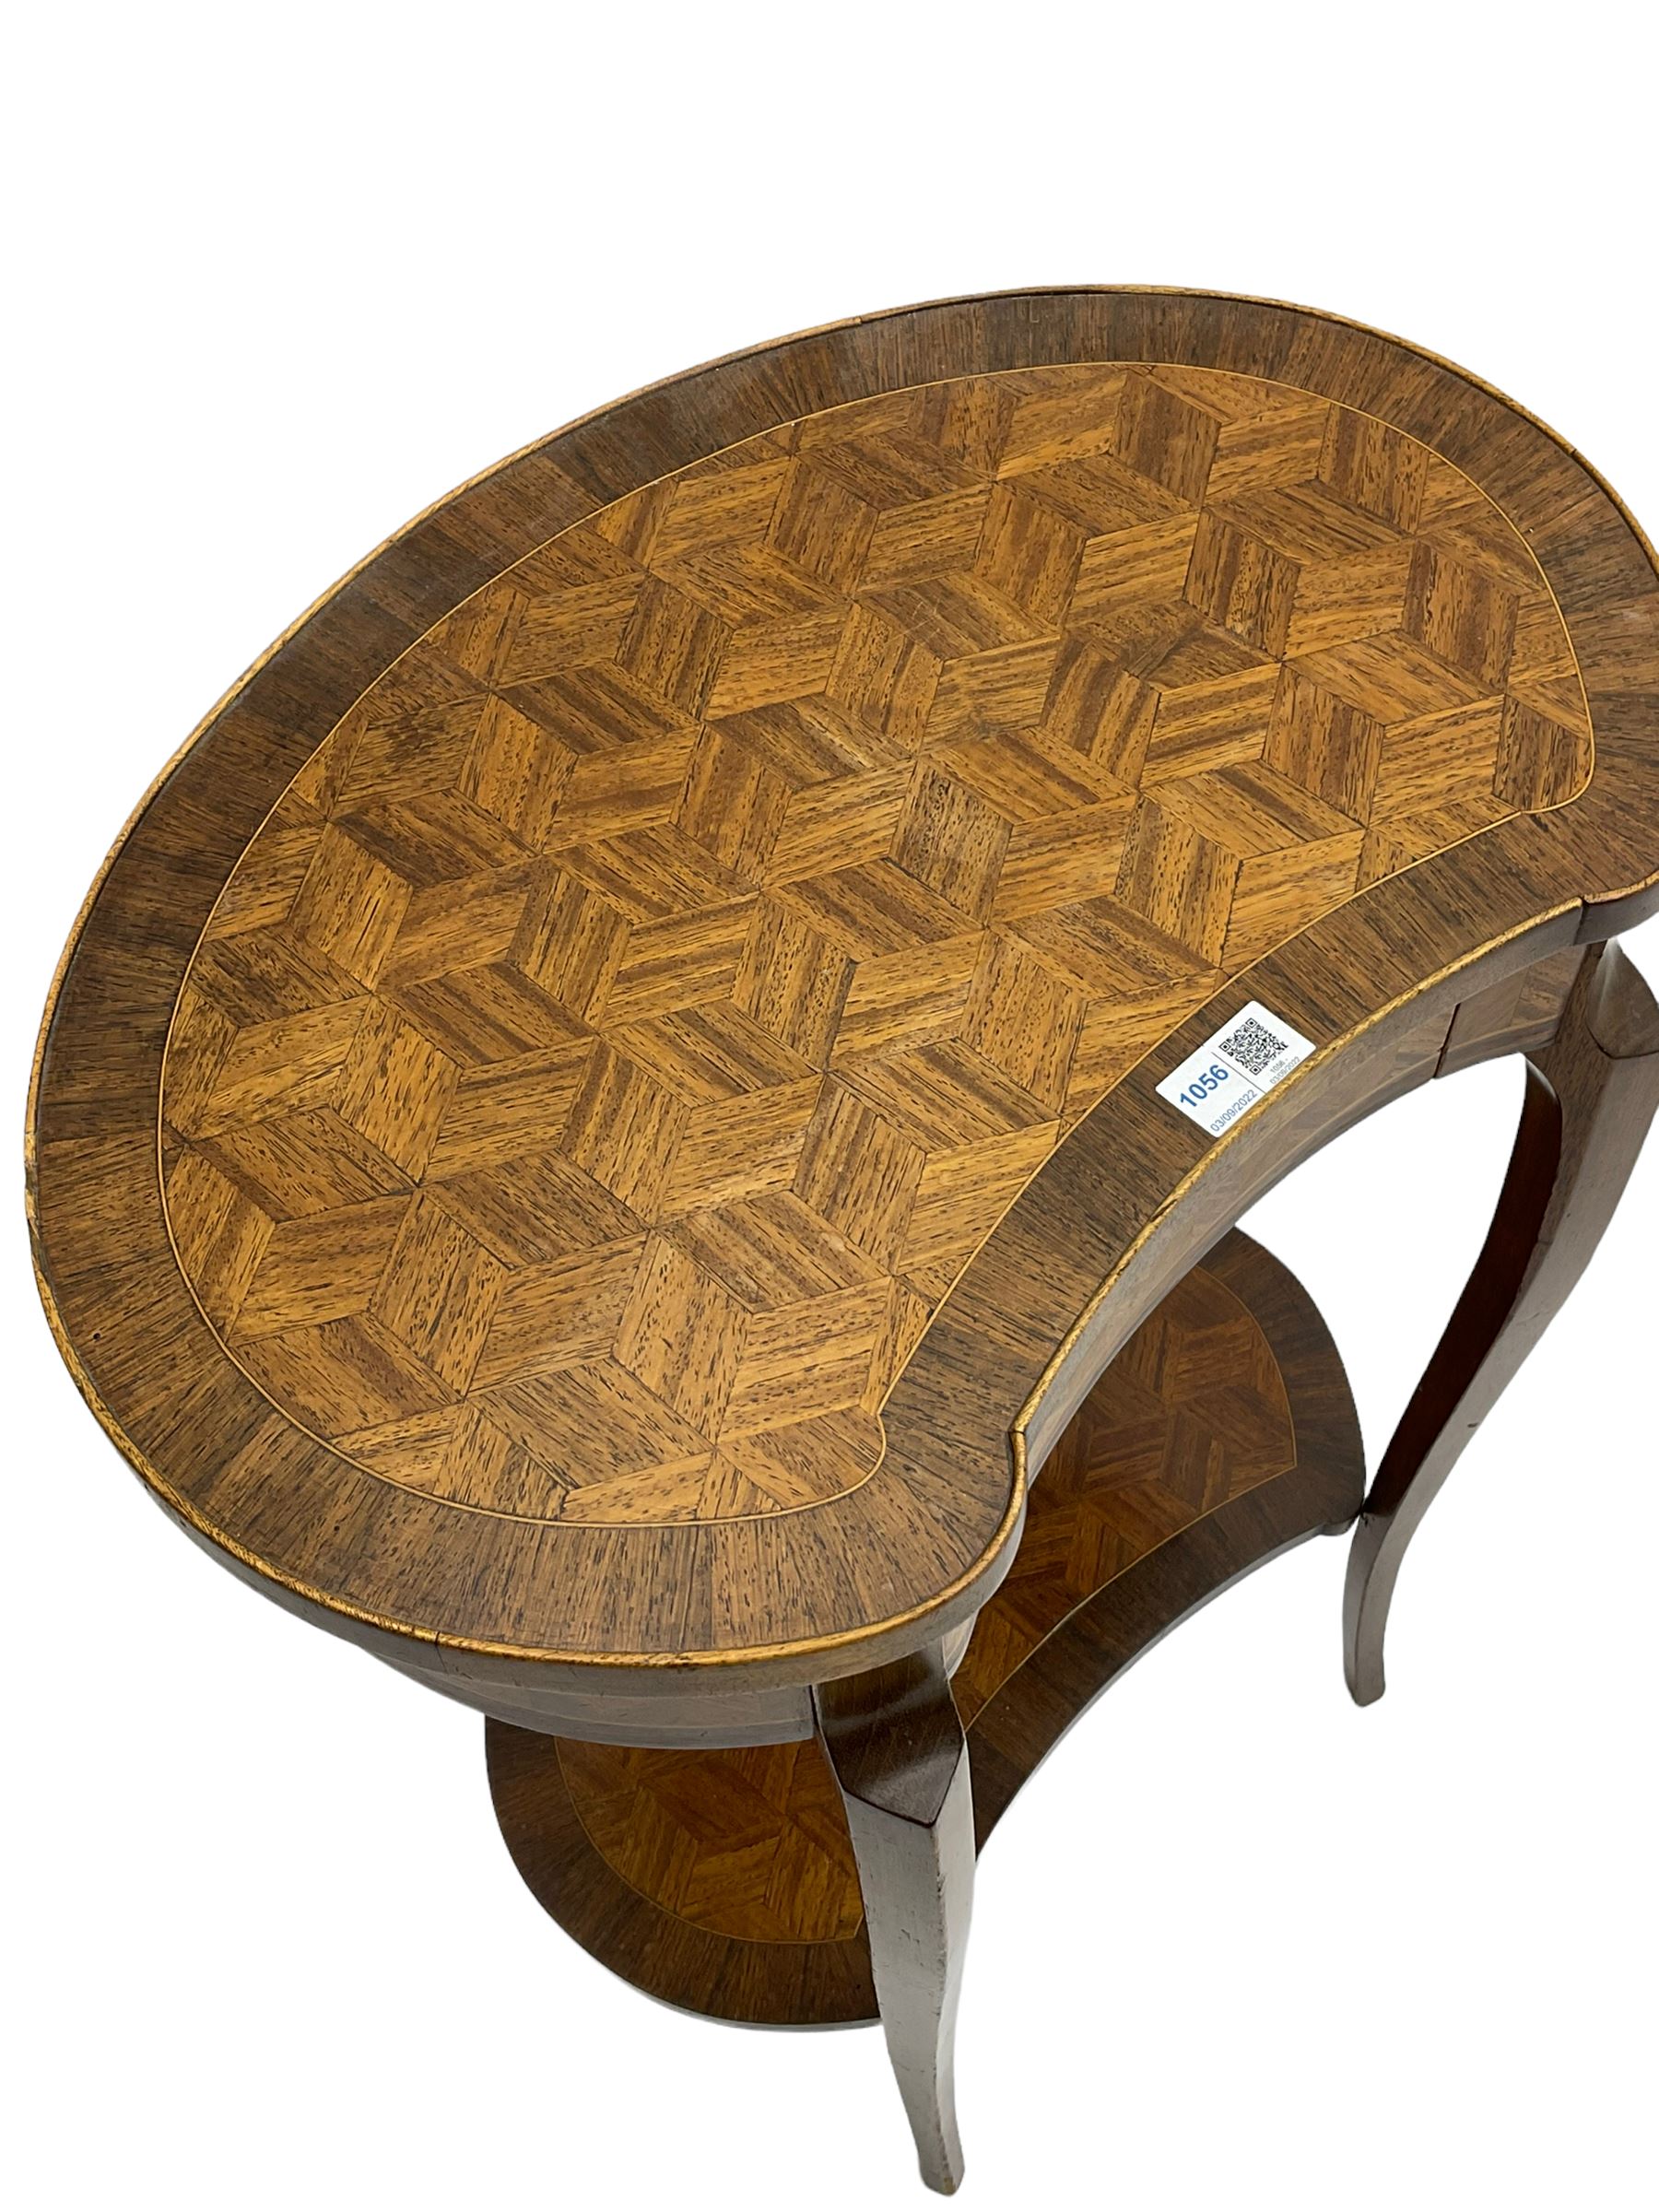 French style walnut parquetry kidney shaped table - Image 3 of 5